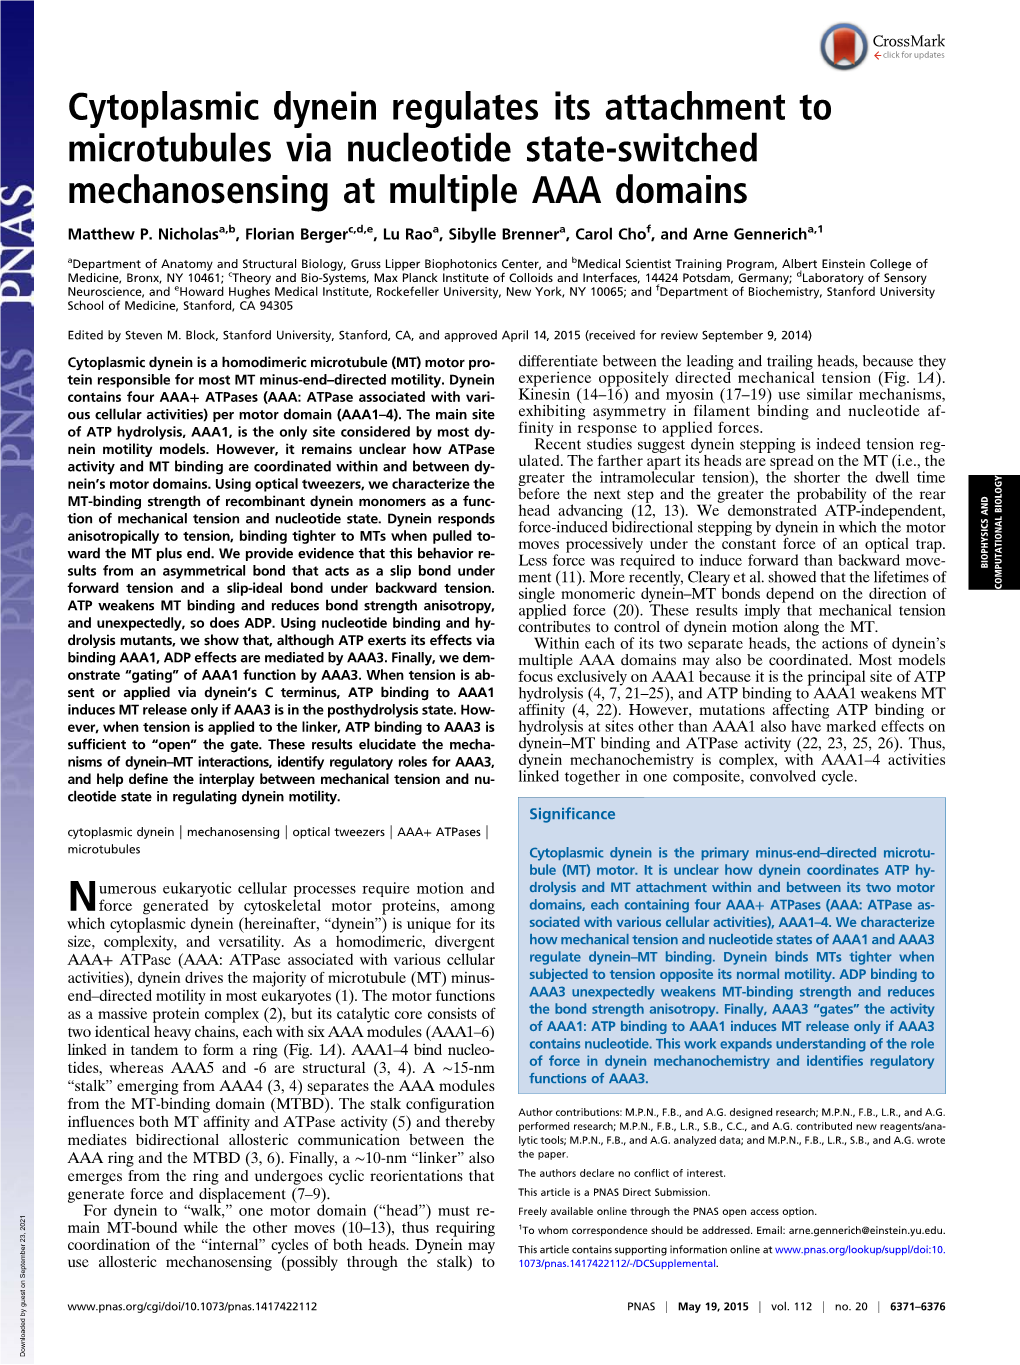 Cytoplasmic Dynein Regulates Its Attachment to Microtubules Via Nucleotide State-Switched Mechanosensing at Multiple AAA Domains